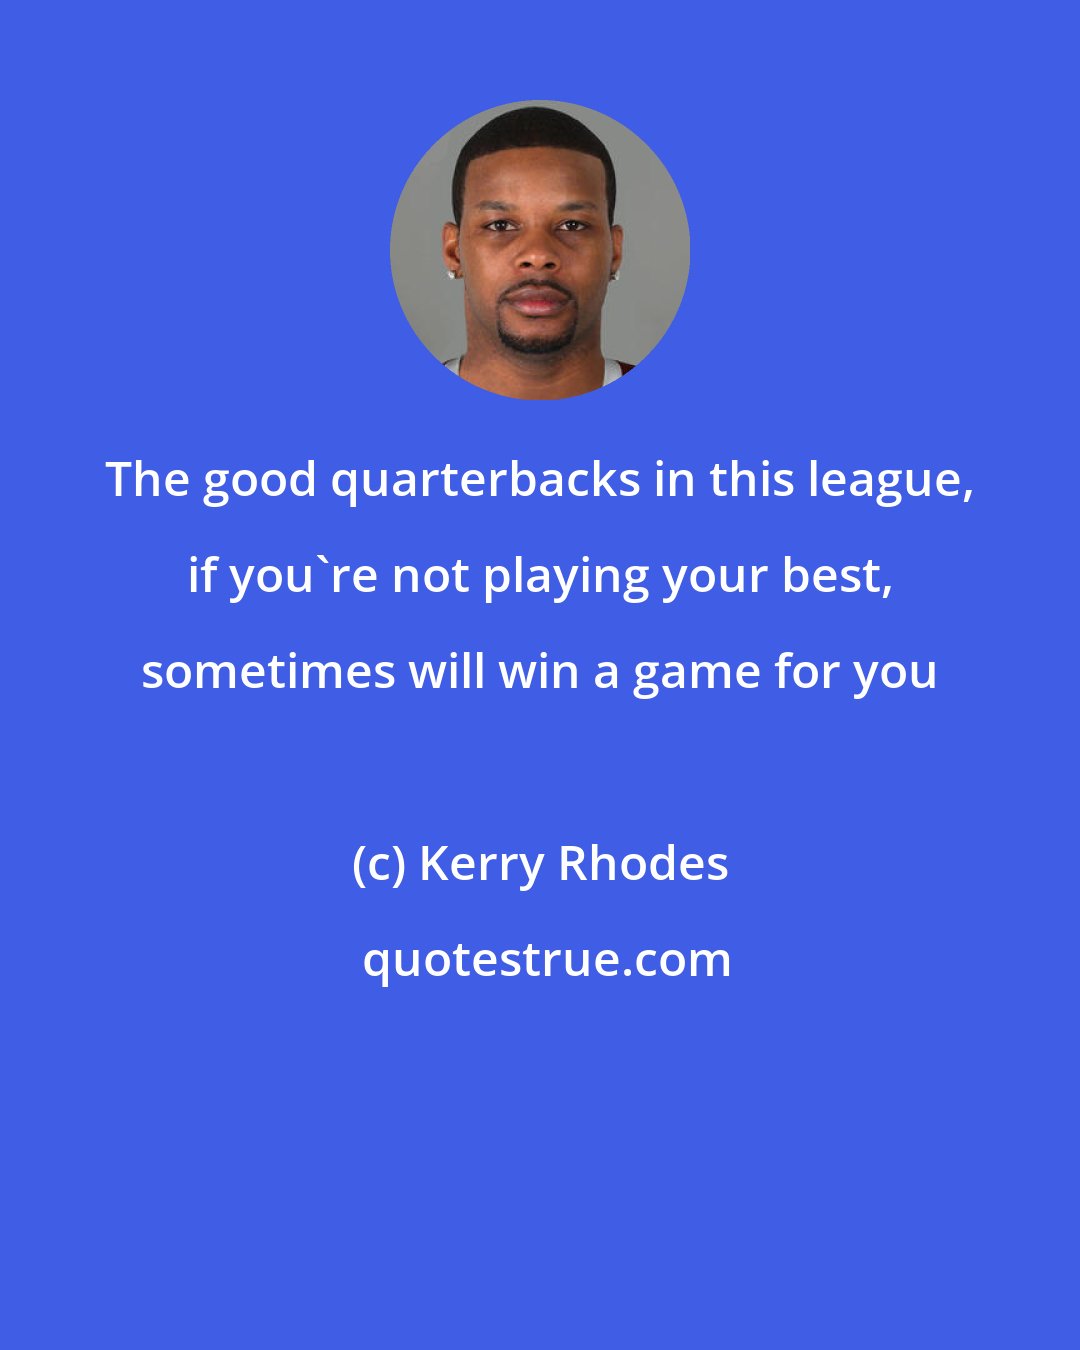 Kerry Rhodes: The good quarterbacks in this league, if you're not playing your best, sometimes will win a game for you